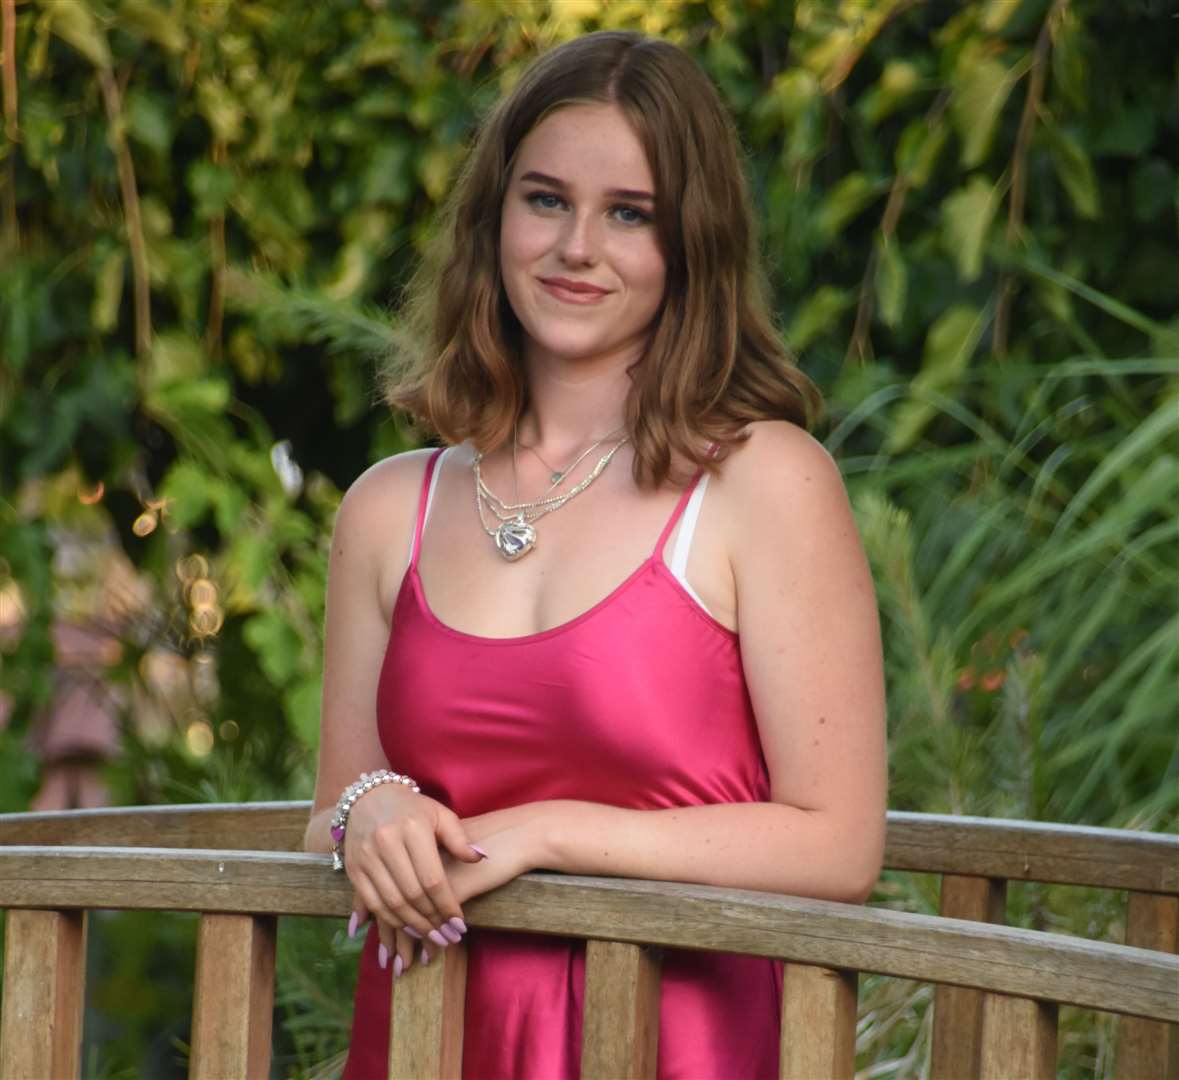 Highstead Grammar pupil Ellie Paine who died after being hit by a car in Sittingbourne on November 1. She was 16